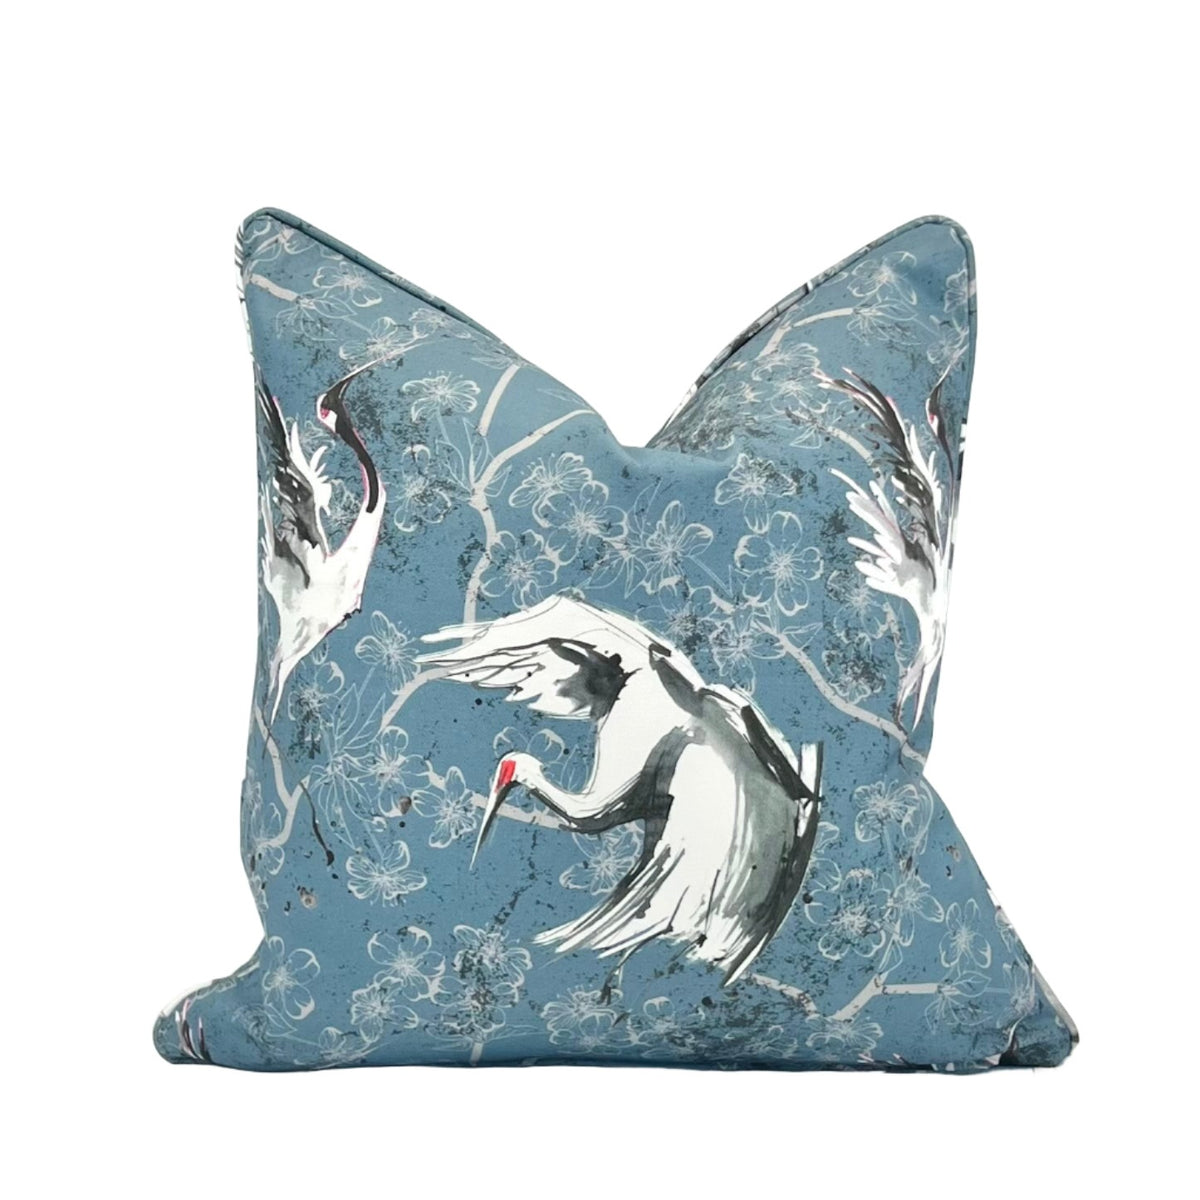 Decorative Pillow Cover in Chinoiserie Water Colored Herons/Cranes and Cherry Blossoms